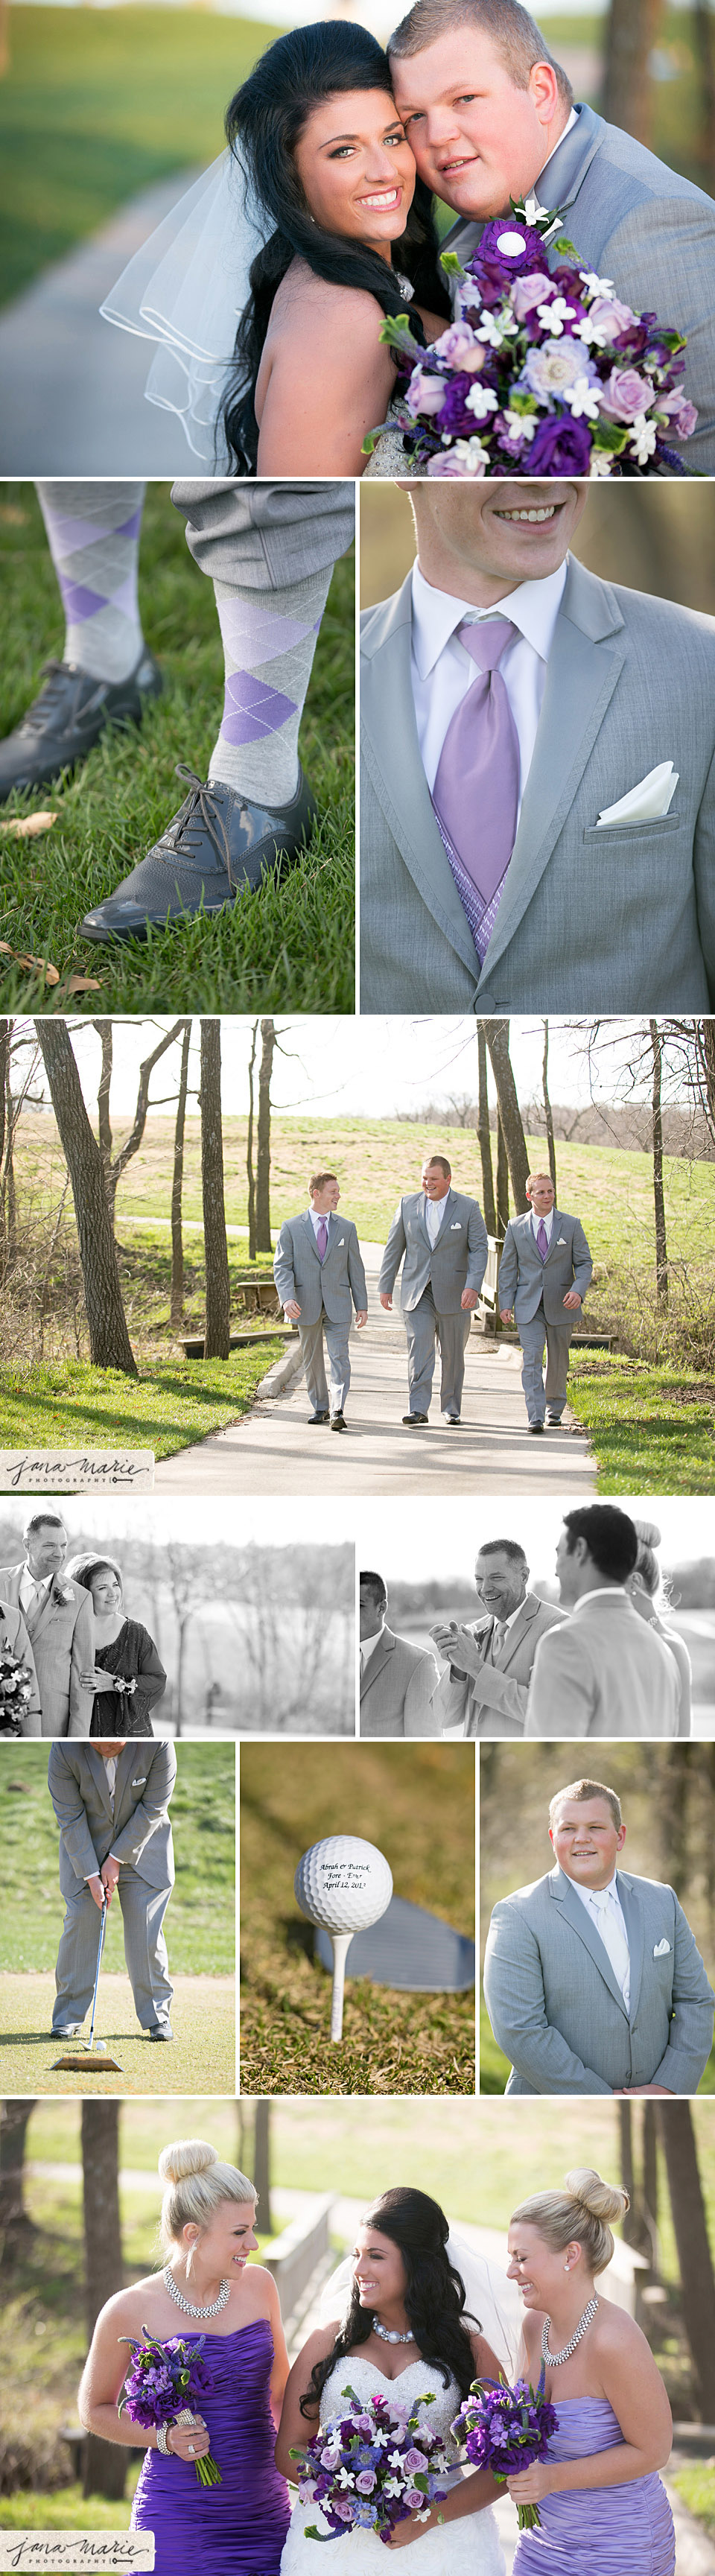 Kansas City wedding photographer, Independence wedding venues, Outdoor wedding, Lavendars, Bride and groom, laughing